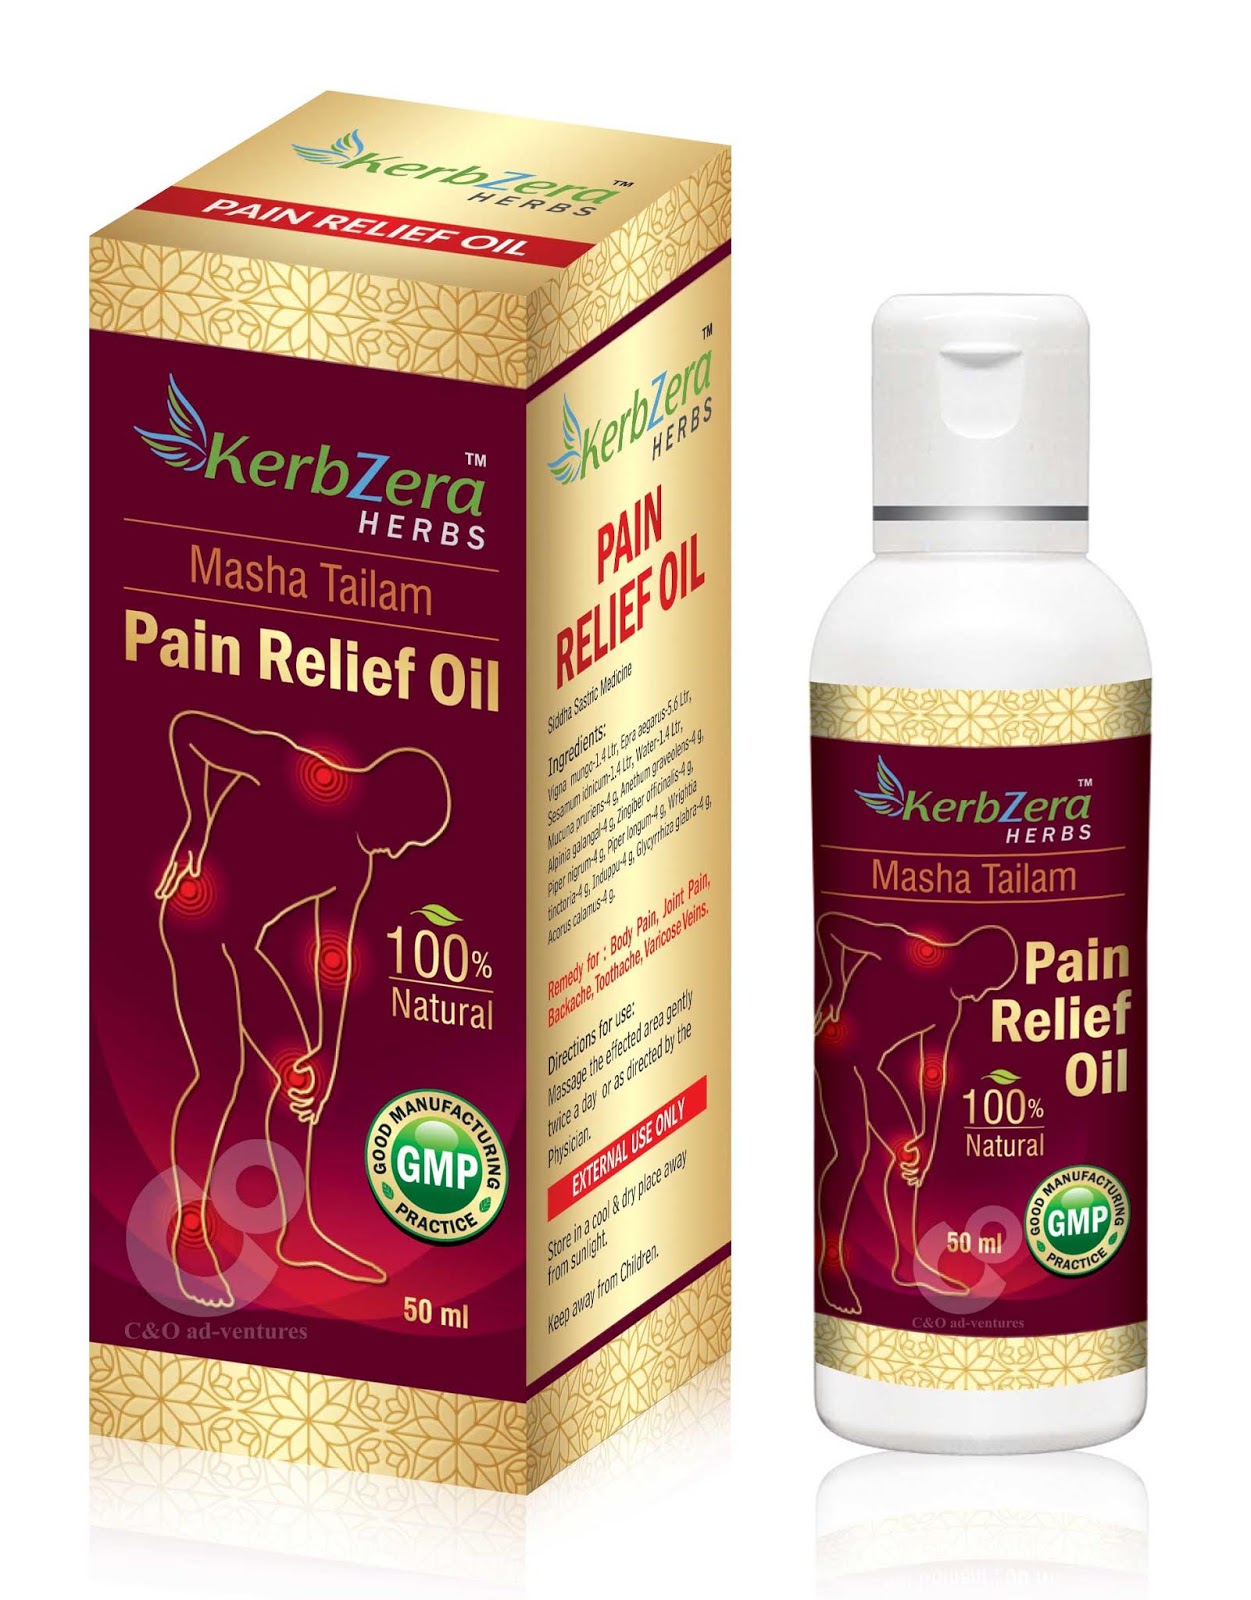 C And O Ad Ventures Herbal Pain Relief Oil Package Design